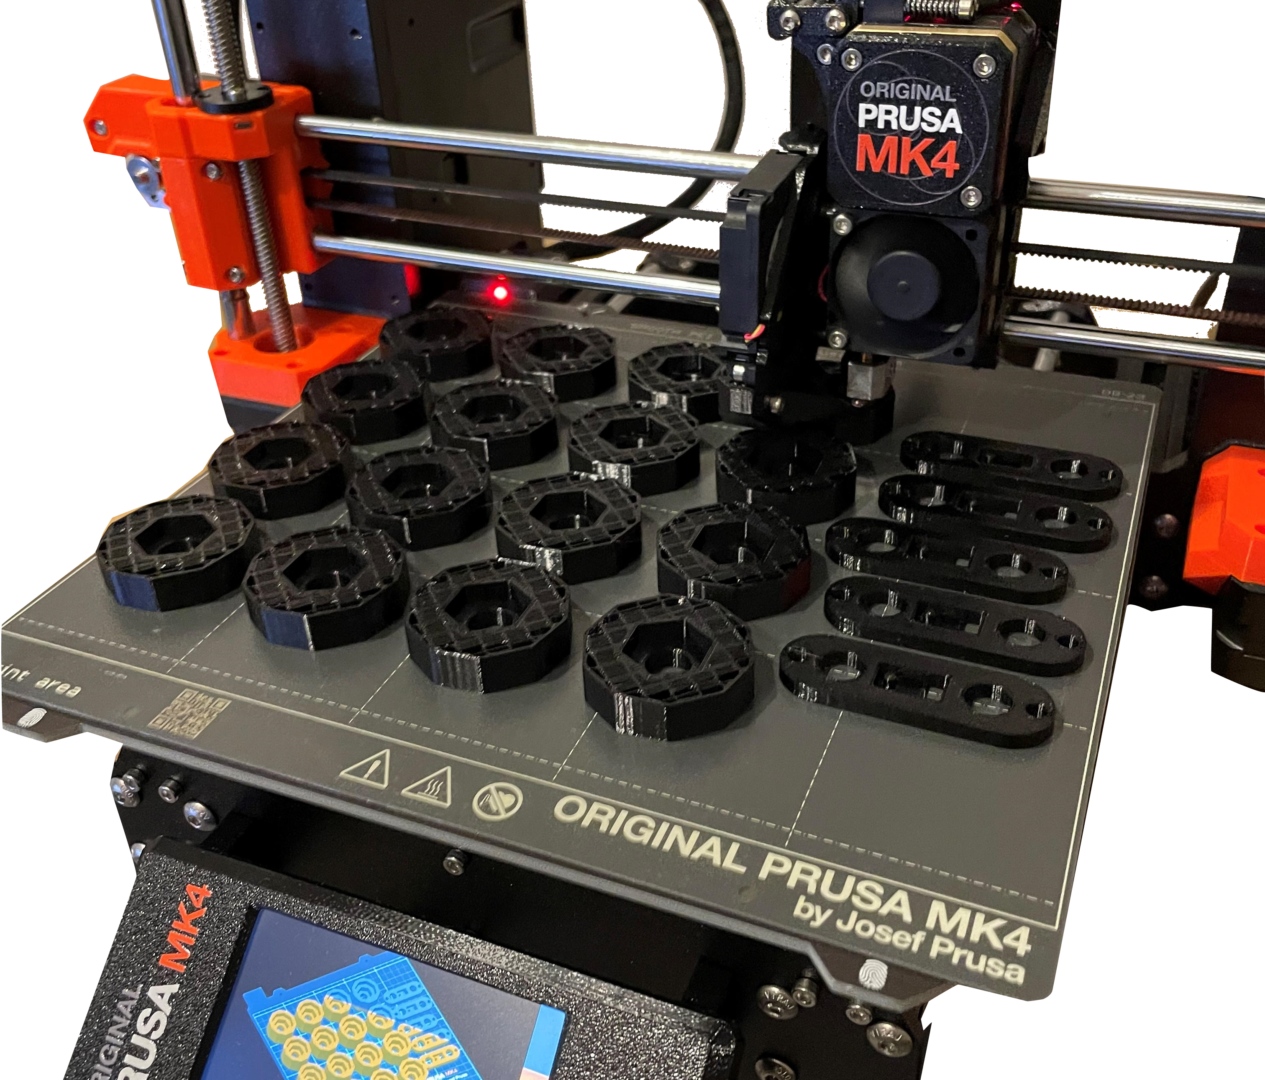 a 3D printer, printing components for our sensory range of products all manufactured in the UK